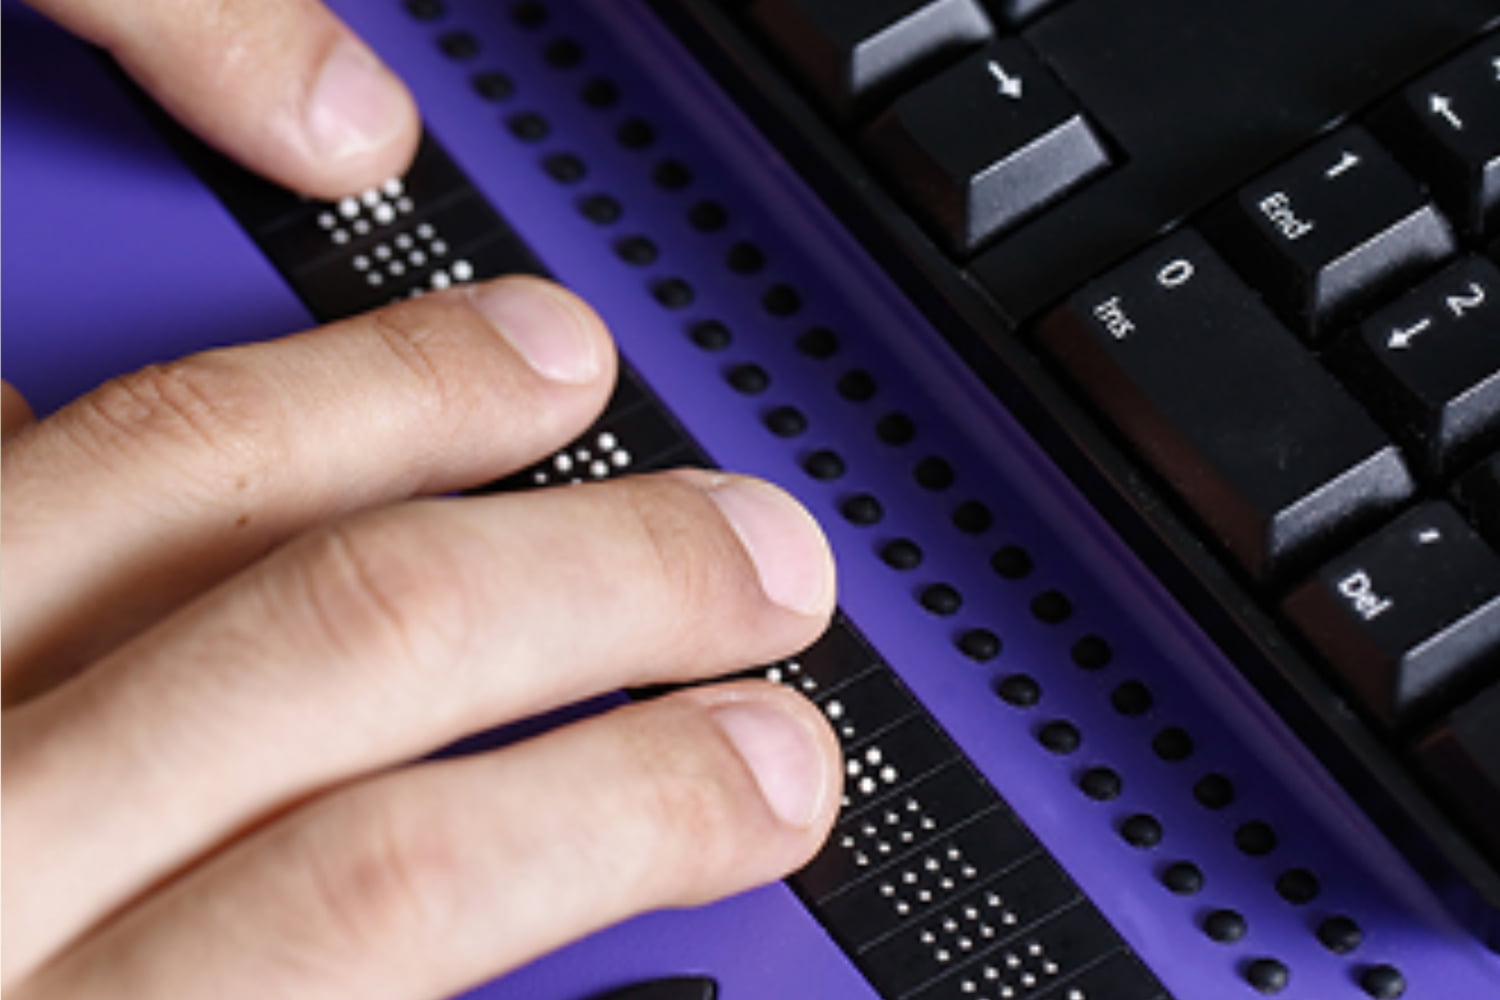 fingers touching braille on a keyboard